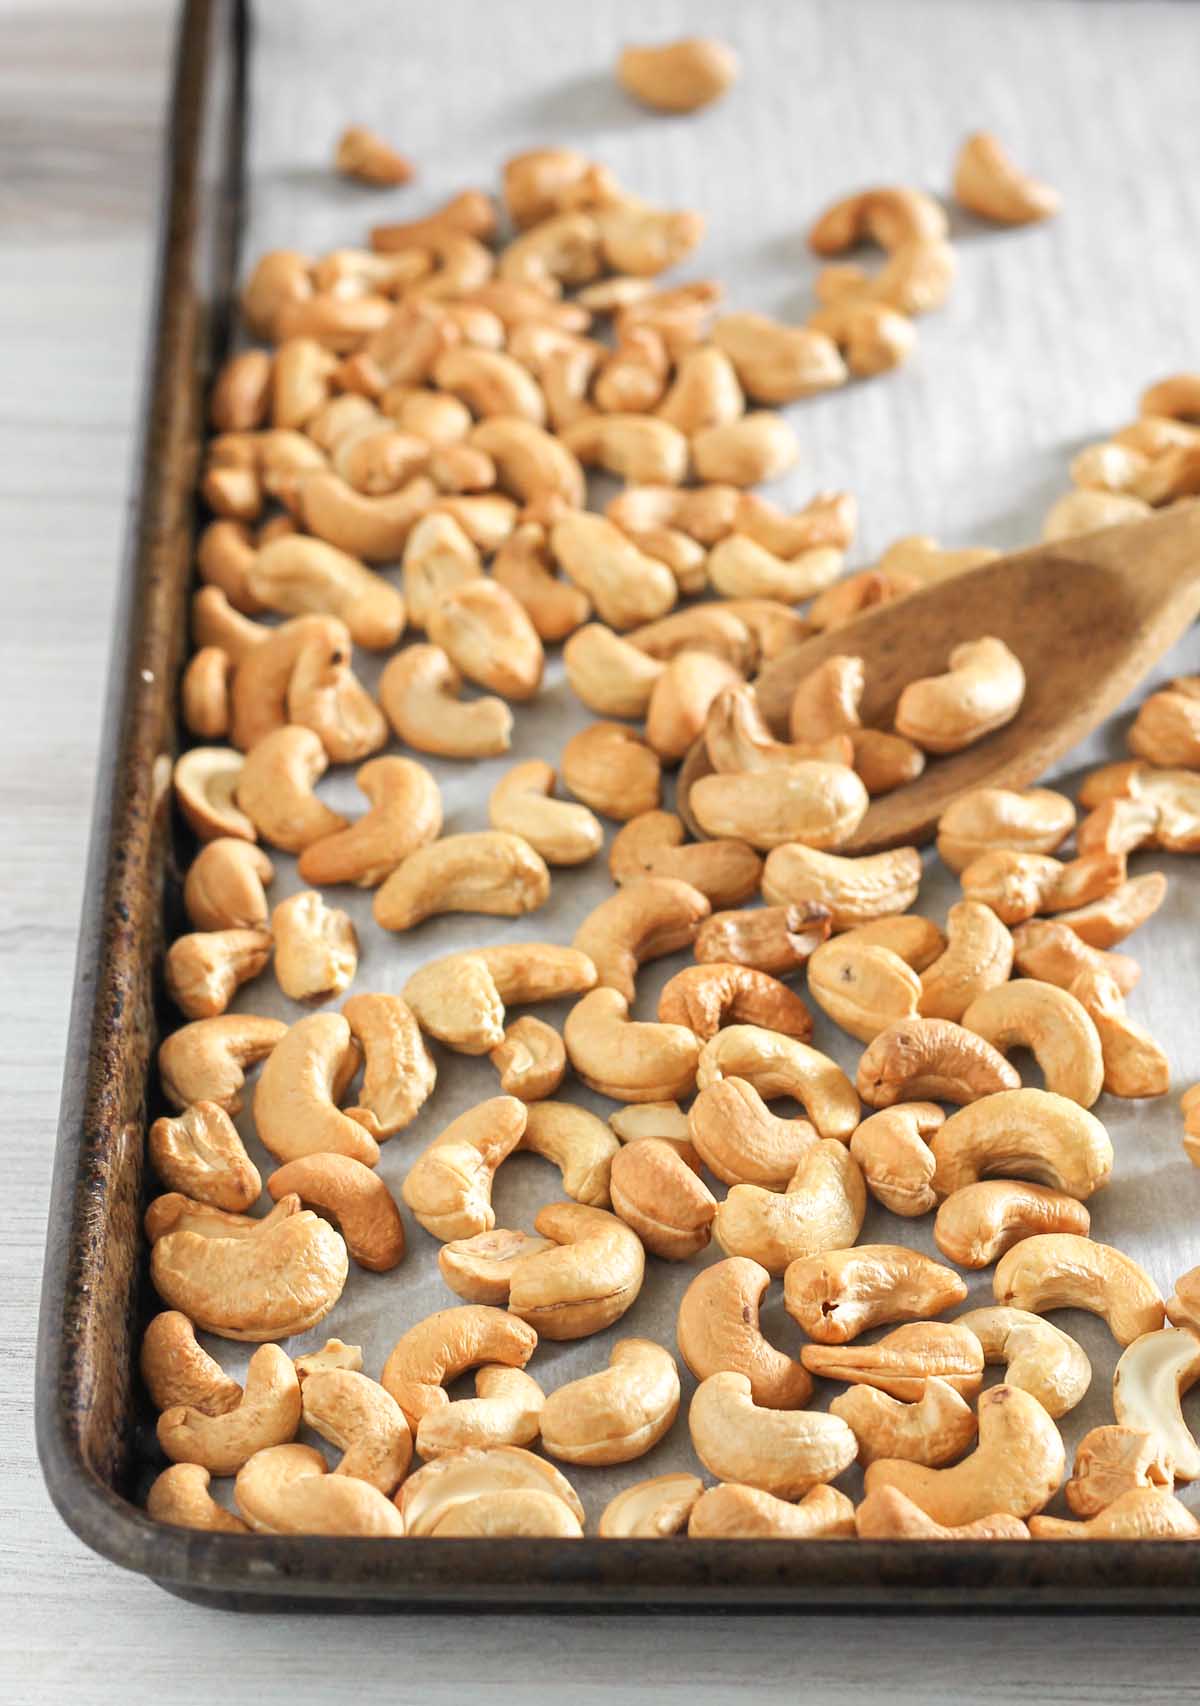 Wooden spoon scooping up roasted cashews on a vintage baking sheet.